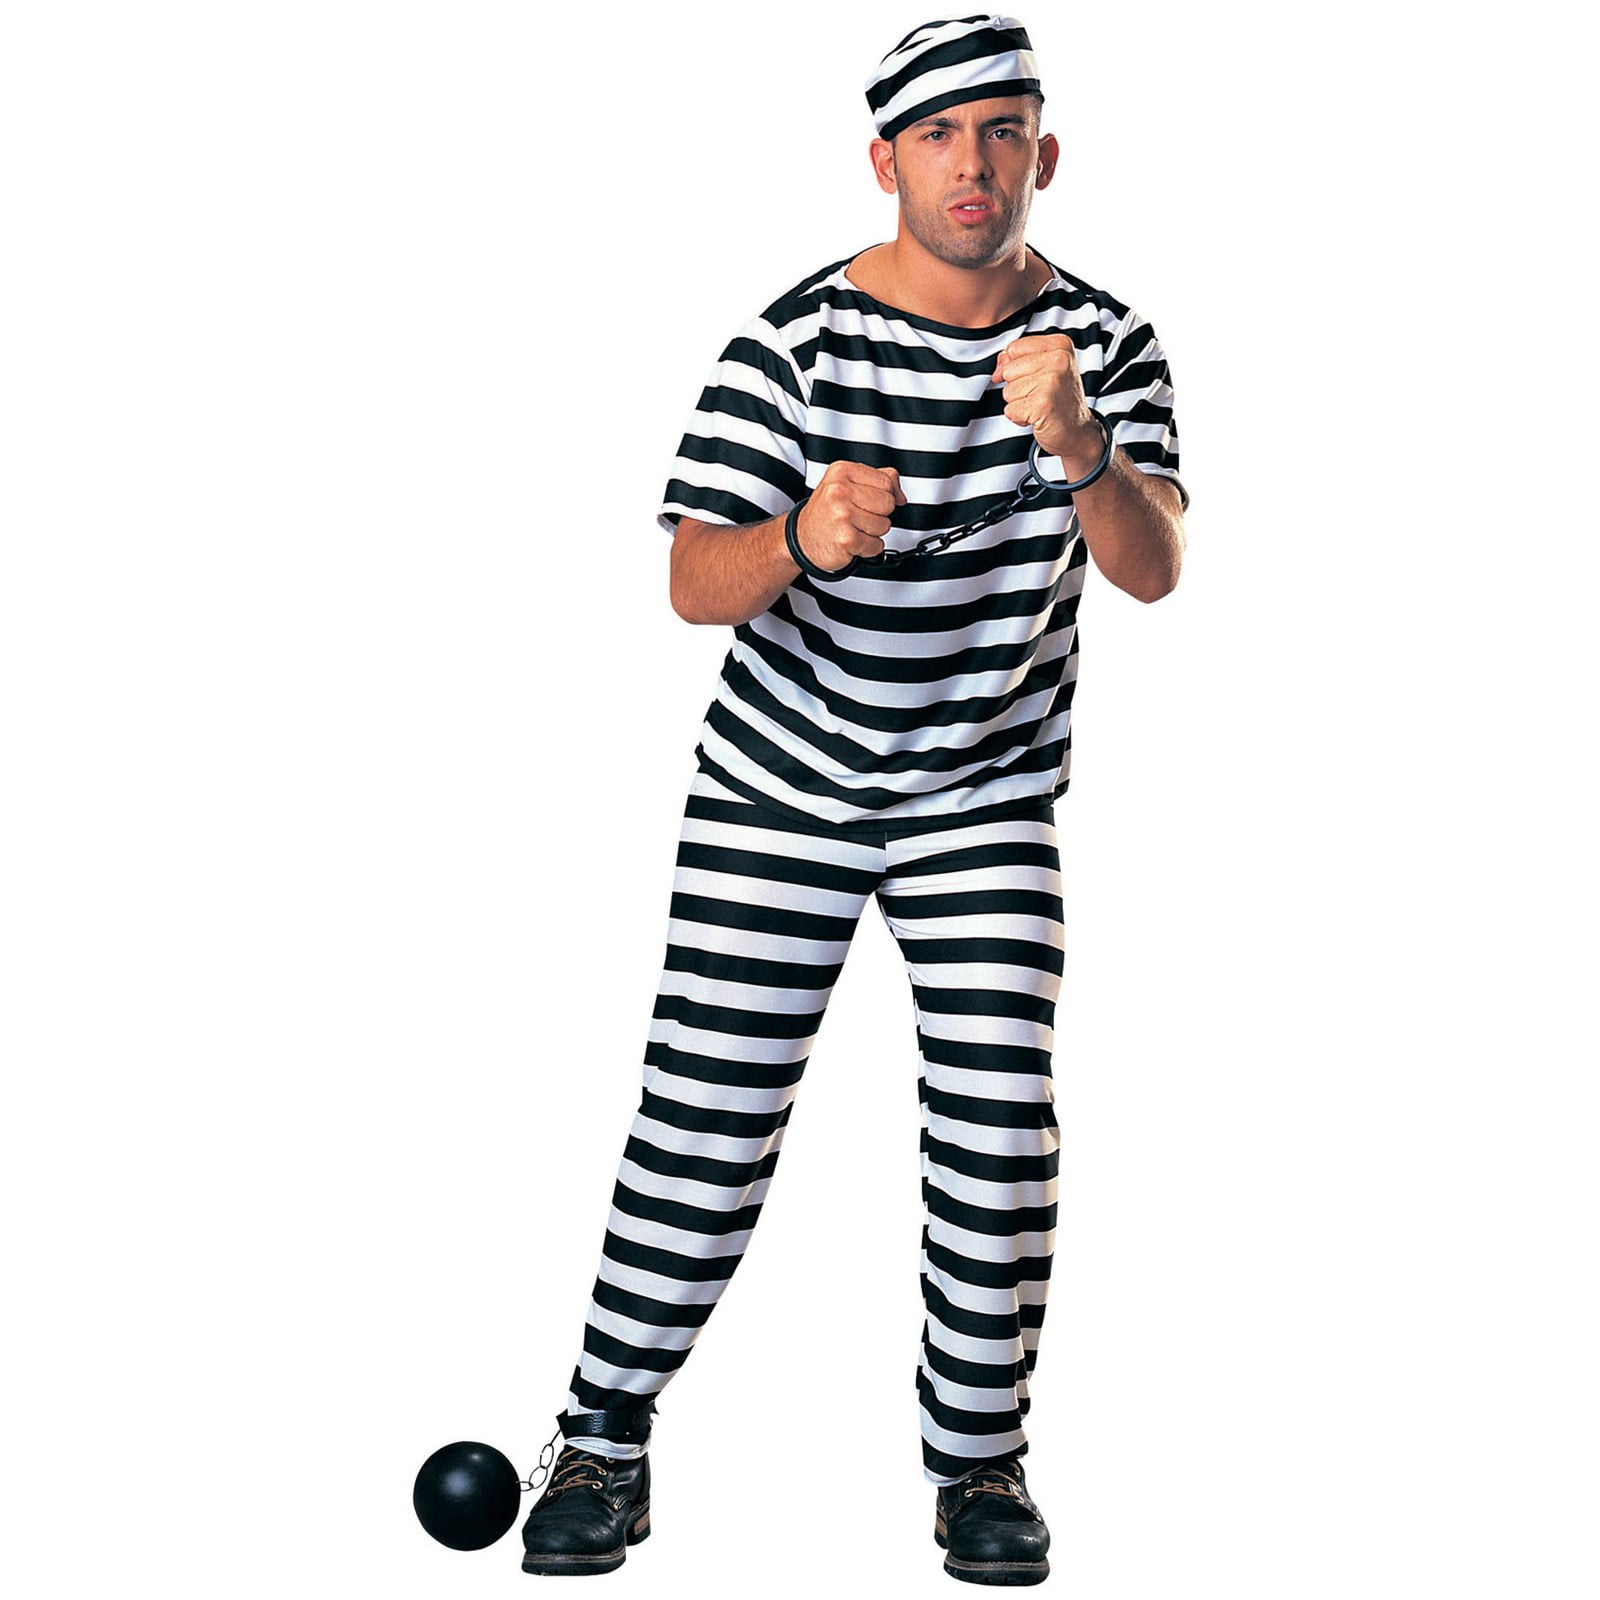 ADULTS PRISONER COSTUME BLACK & WHITE UNISEX HALLOWEEN STAG OUTFIT FANCY DRESS 